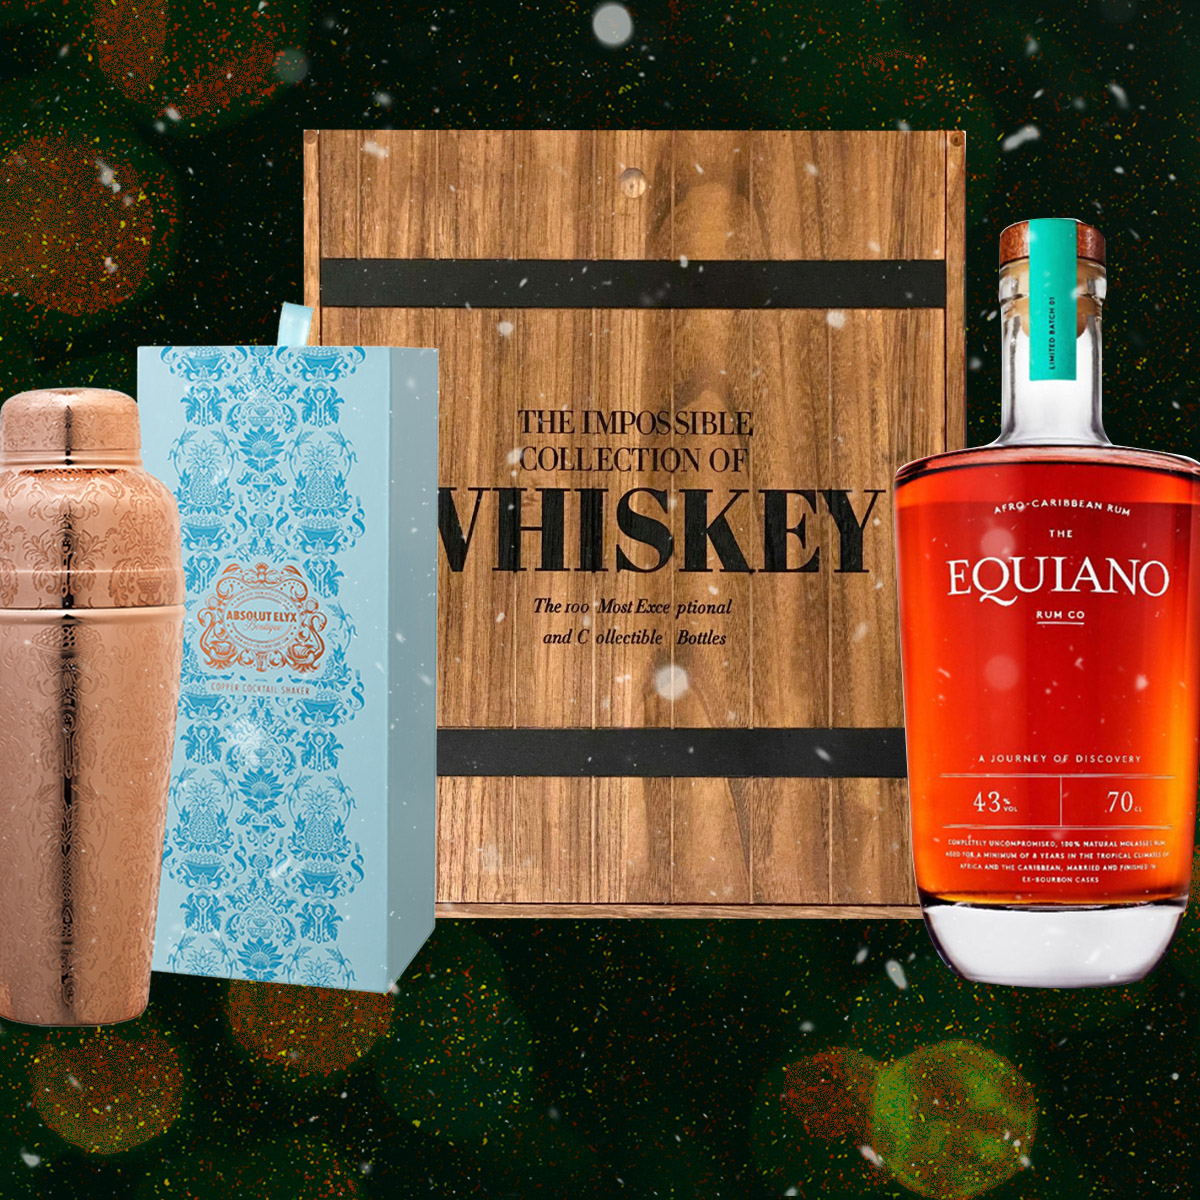 The 16 Best Boozy Gifts for the Serious Drinker